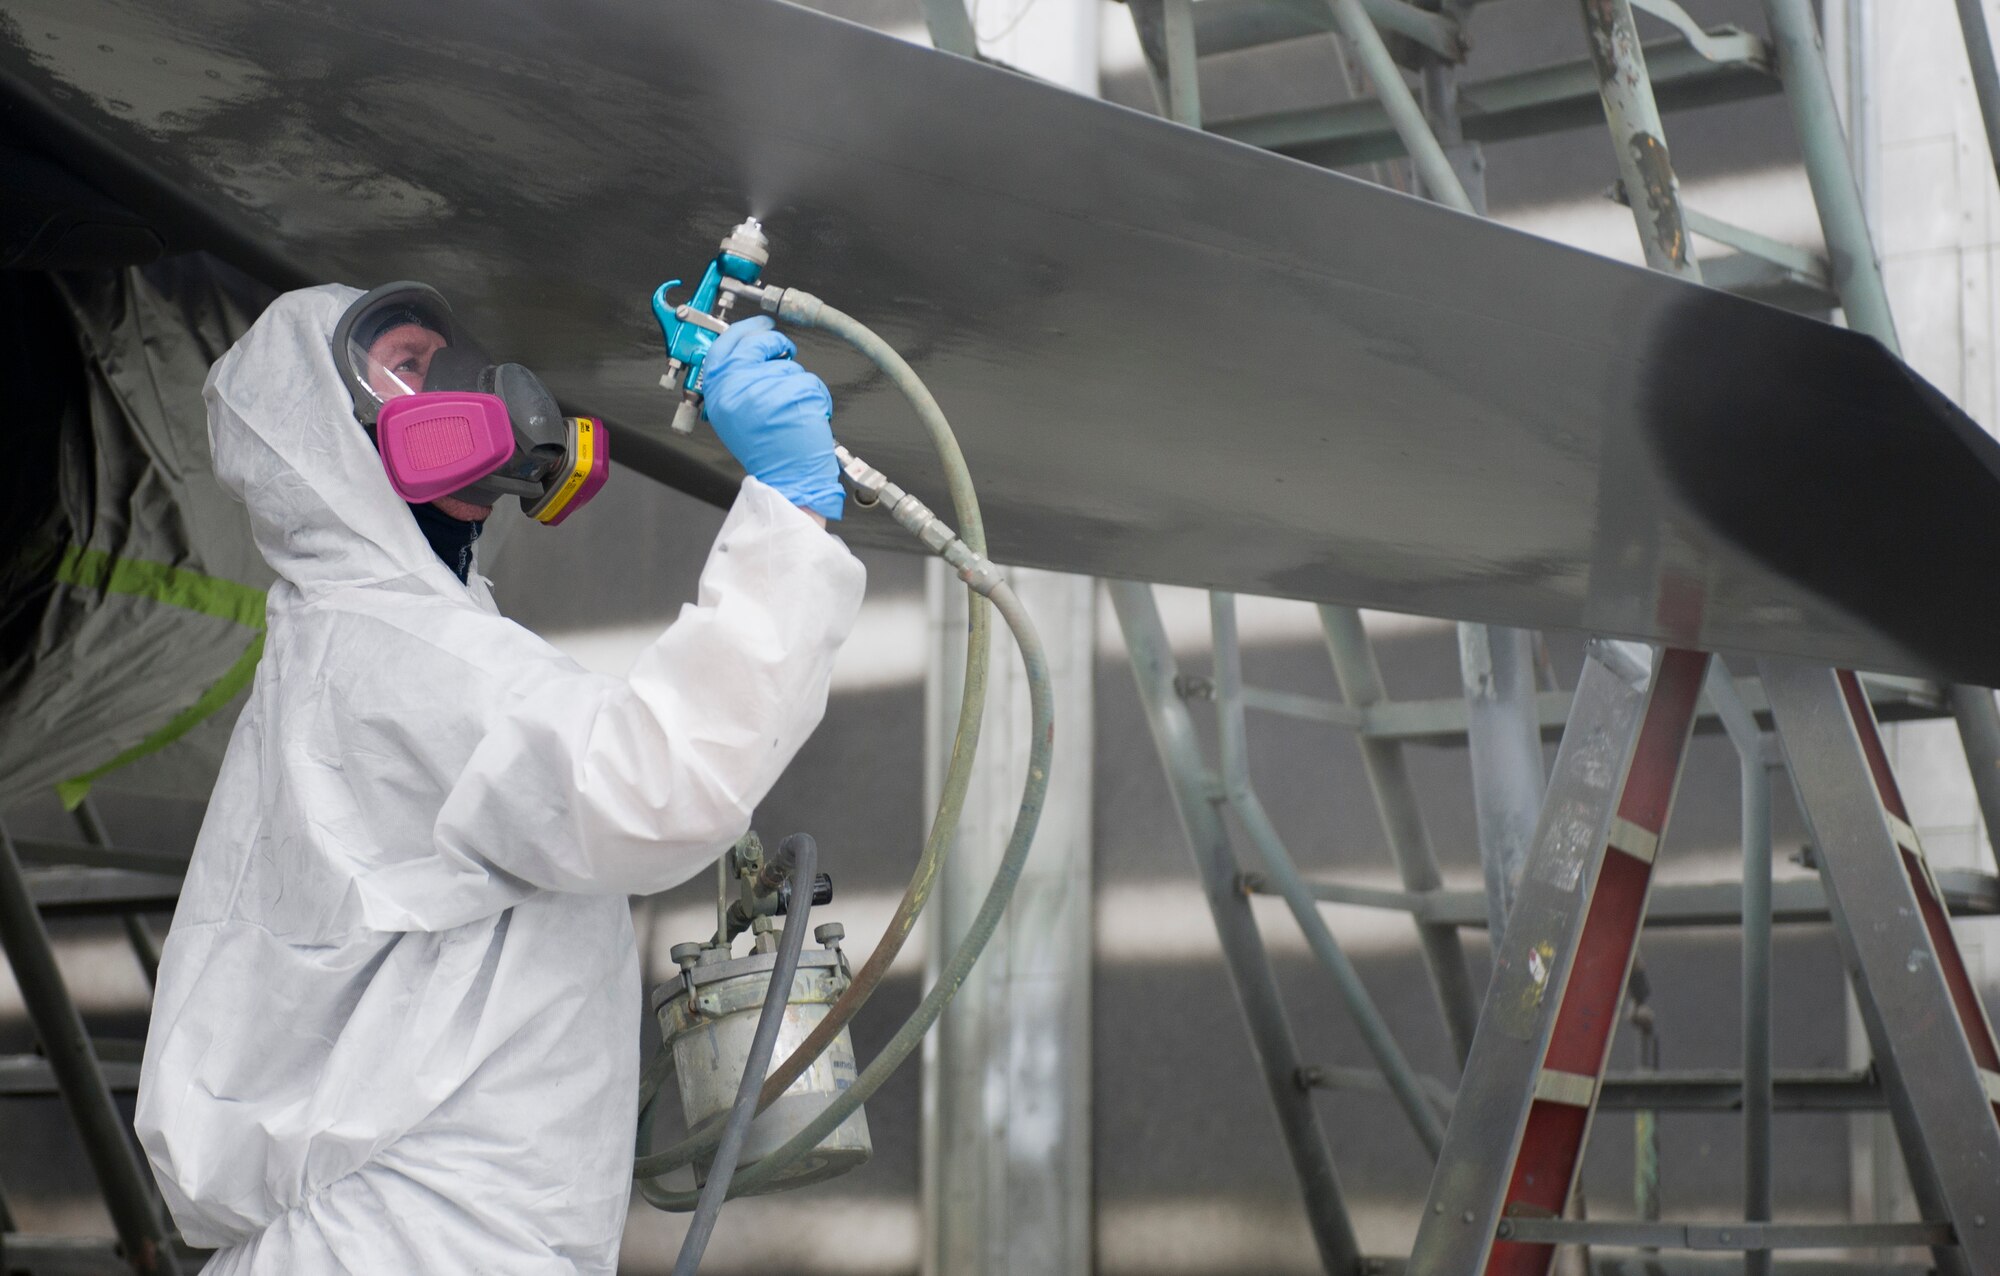 Sean Cornwall, 57th Maintenance Group Corrosion shop aircraft painter, sprays paint onto an F-16 Fighting Falcon inside a temperature-controlled building on Nellis Air Force Base, Nev., Sept. 10, 2015. The paint patterns used on aggressor aircraft are supposed to mirror one another. (U.S. Air Force photo by Airman 1st Class Mikaley Kline)